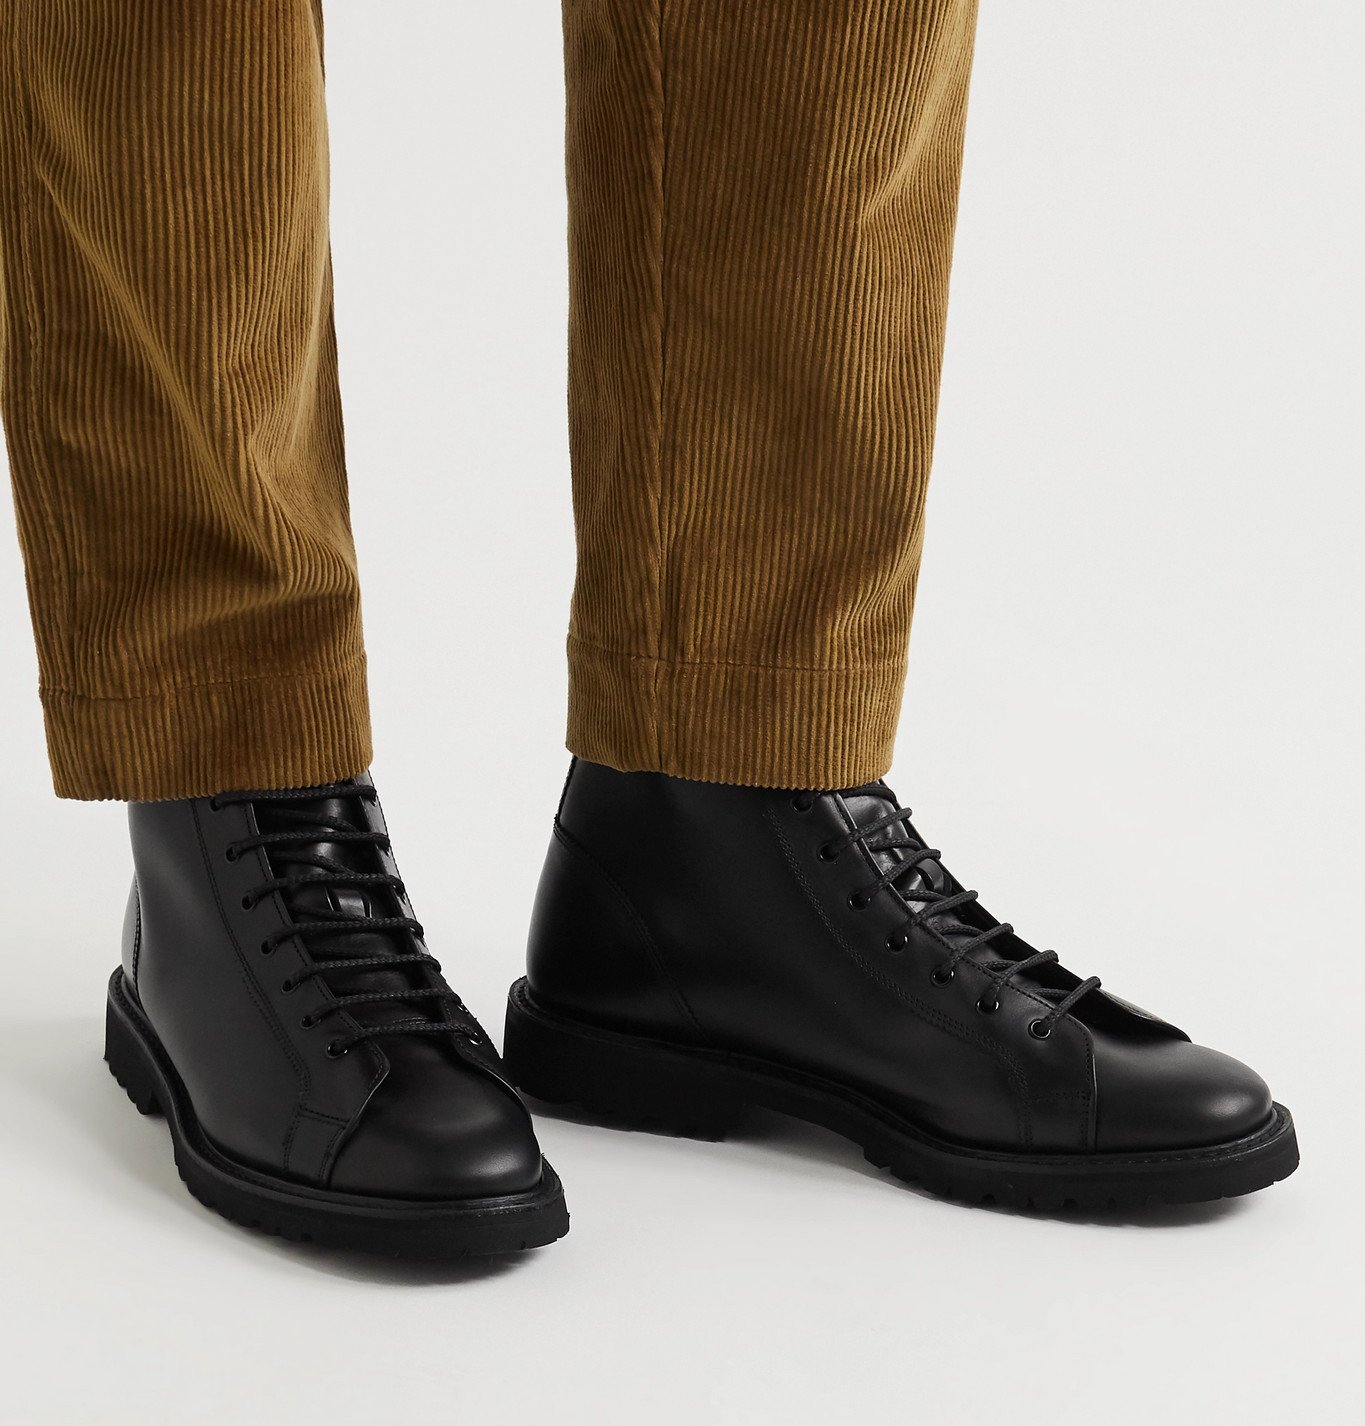 Tricker's - Ethan Leather Boots - Black Tricker's